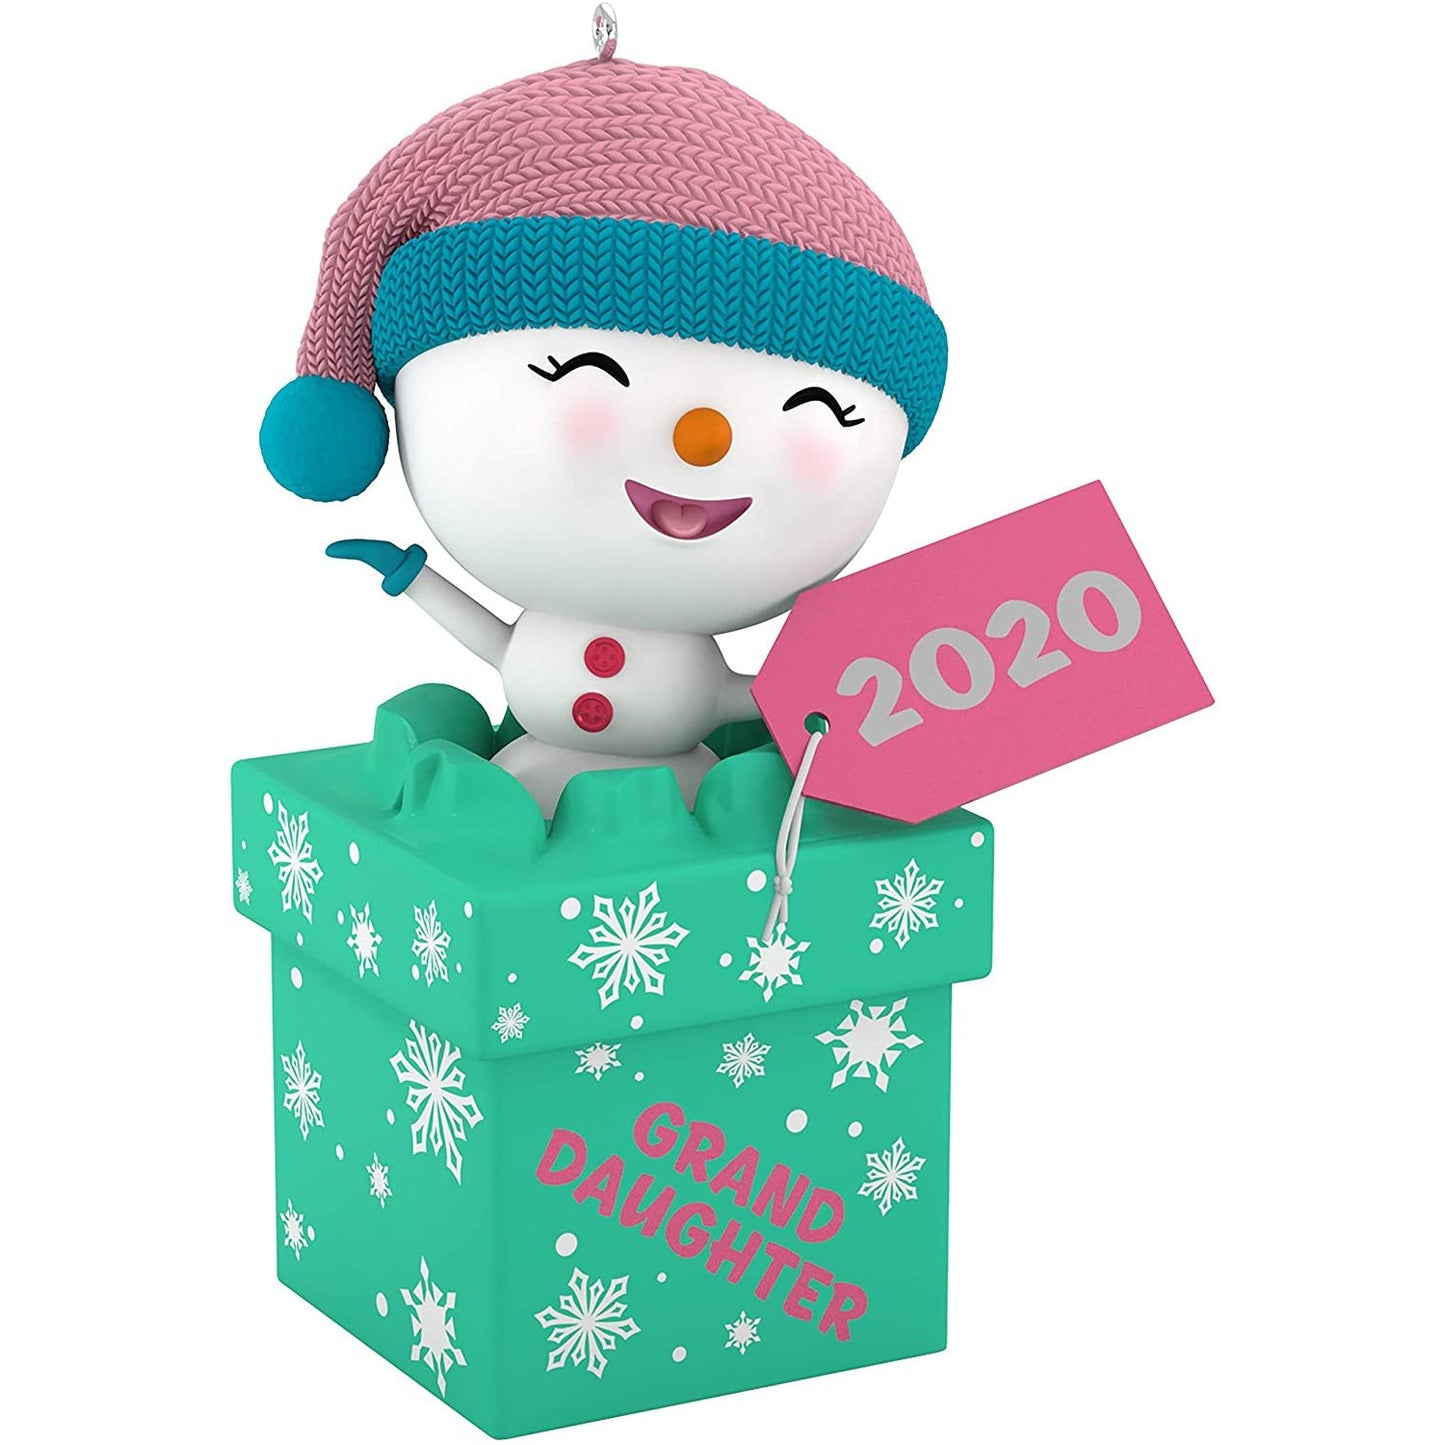 Hallmark Keepsake Christmas Ornament 2020 Year-Dated, The Gift of Granddaughters Snowman